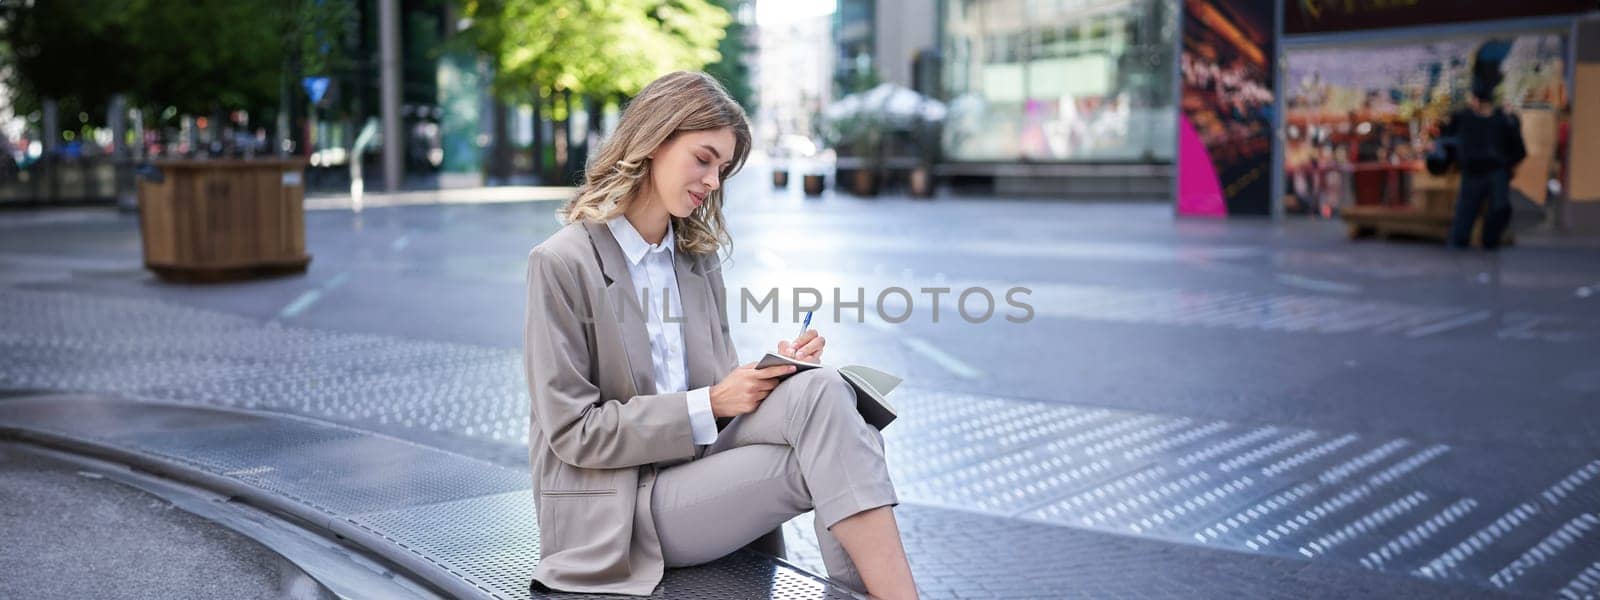 Businesswoman writing down her thoughts, corporate lady sits outdoors, works, brainstorming.